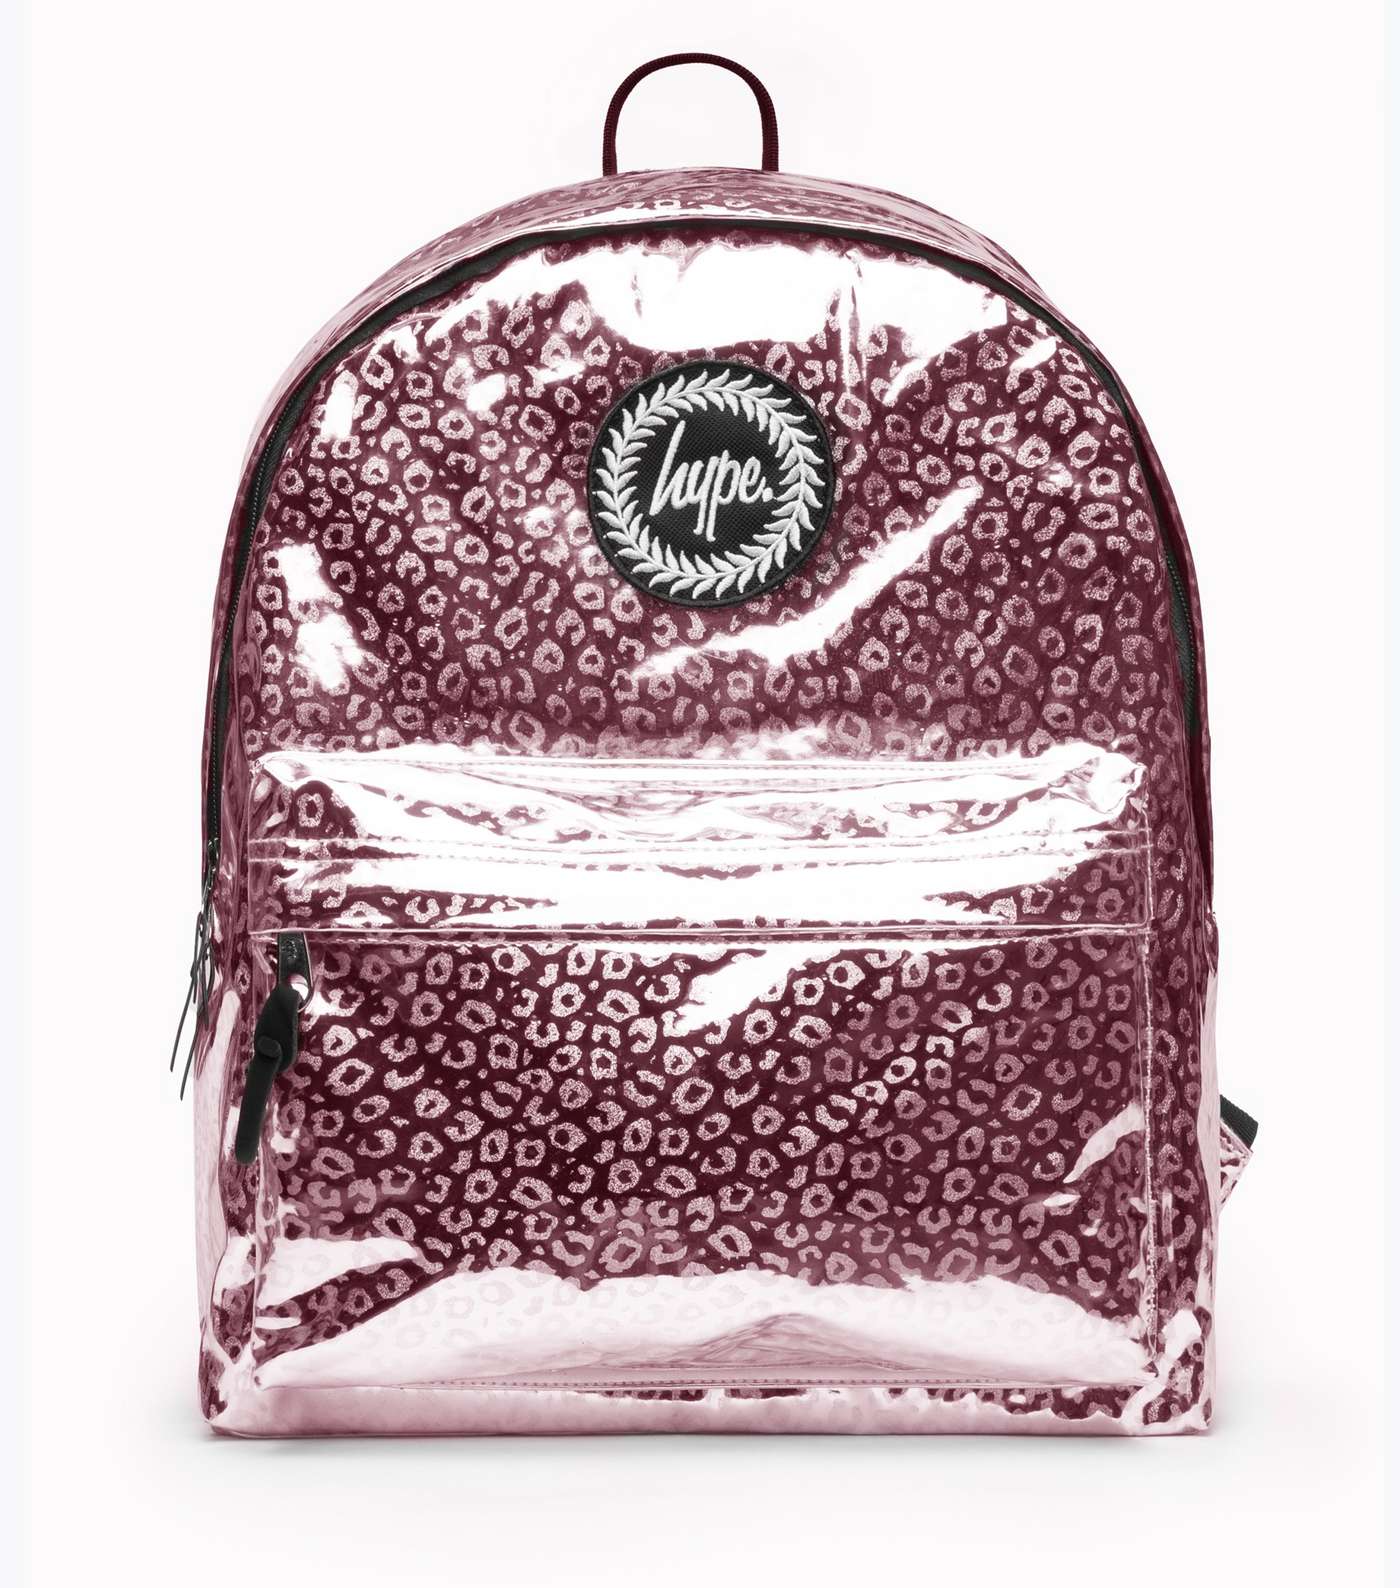 HYPE KIDS Pink Leopard Print Holographic Backpack